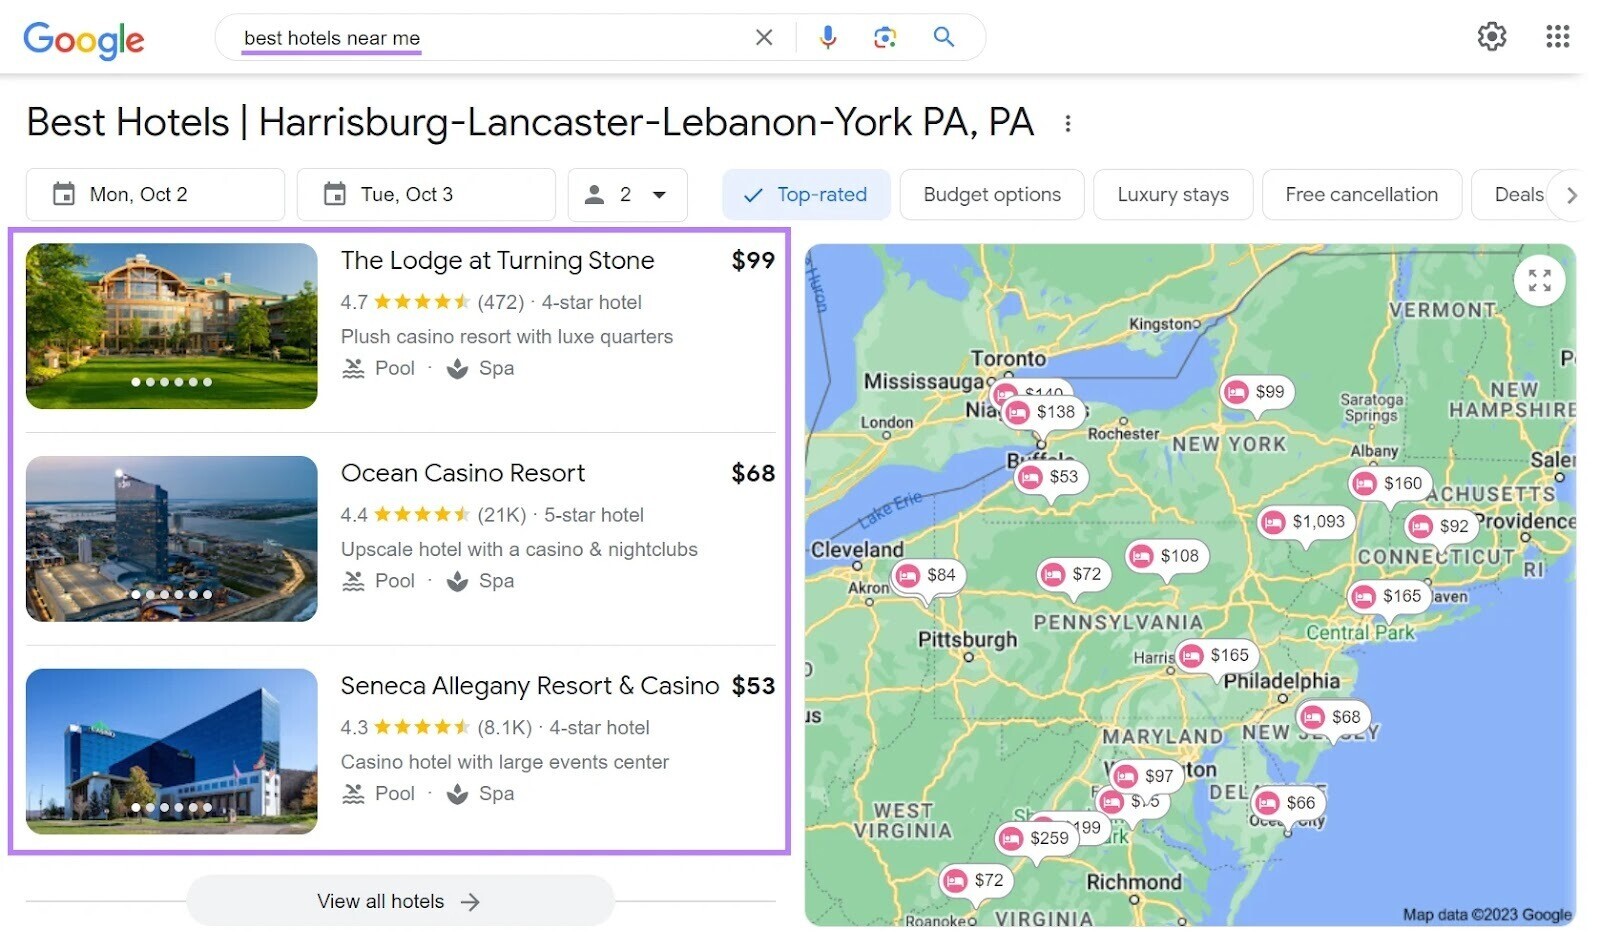 Google Maps results for “best hotels near me” query